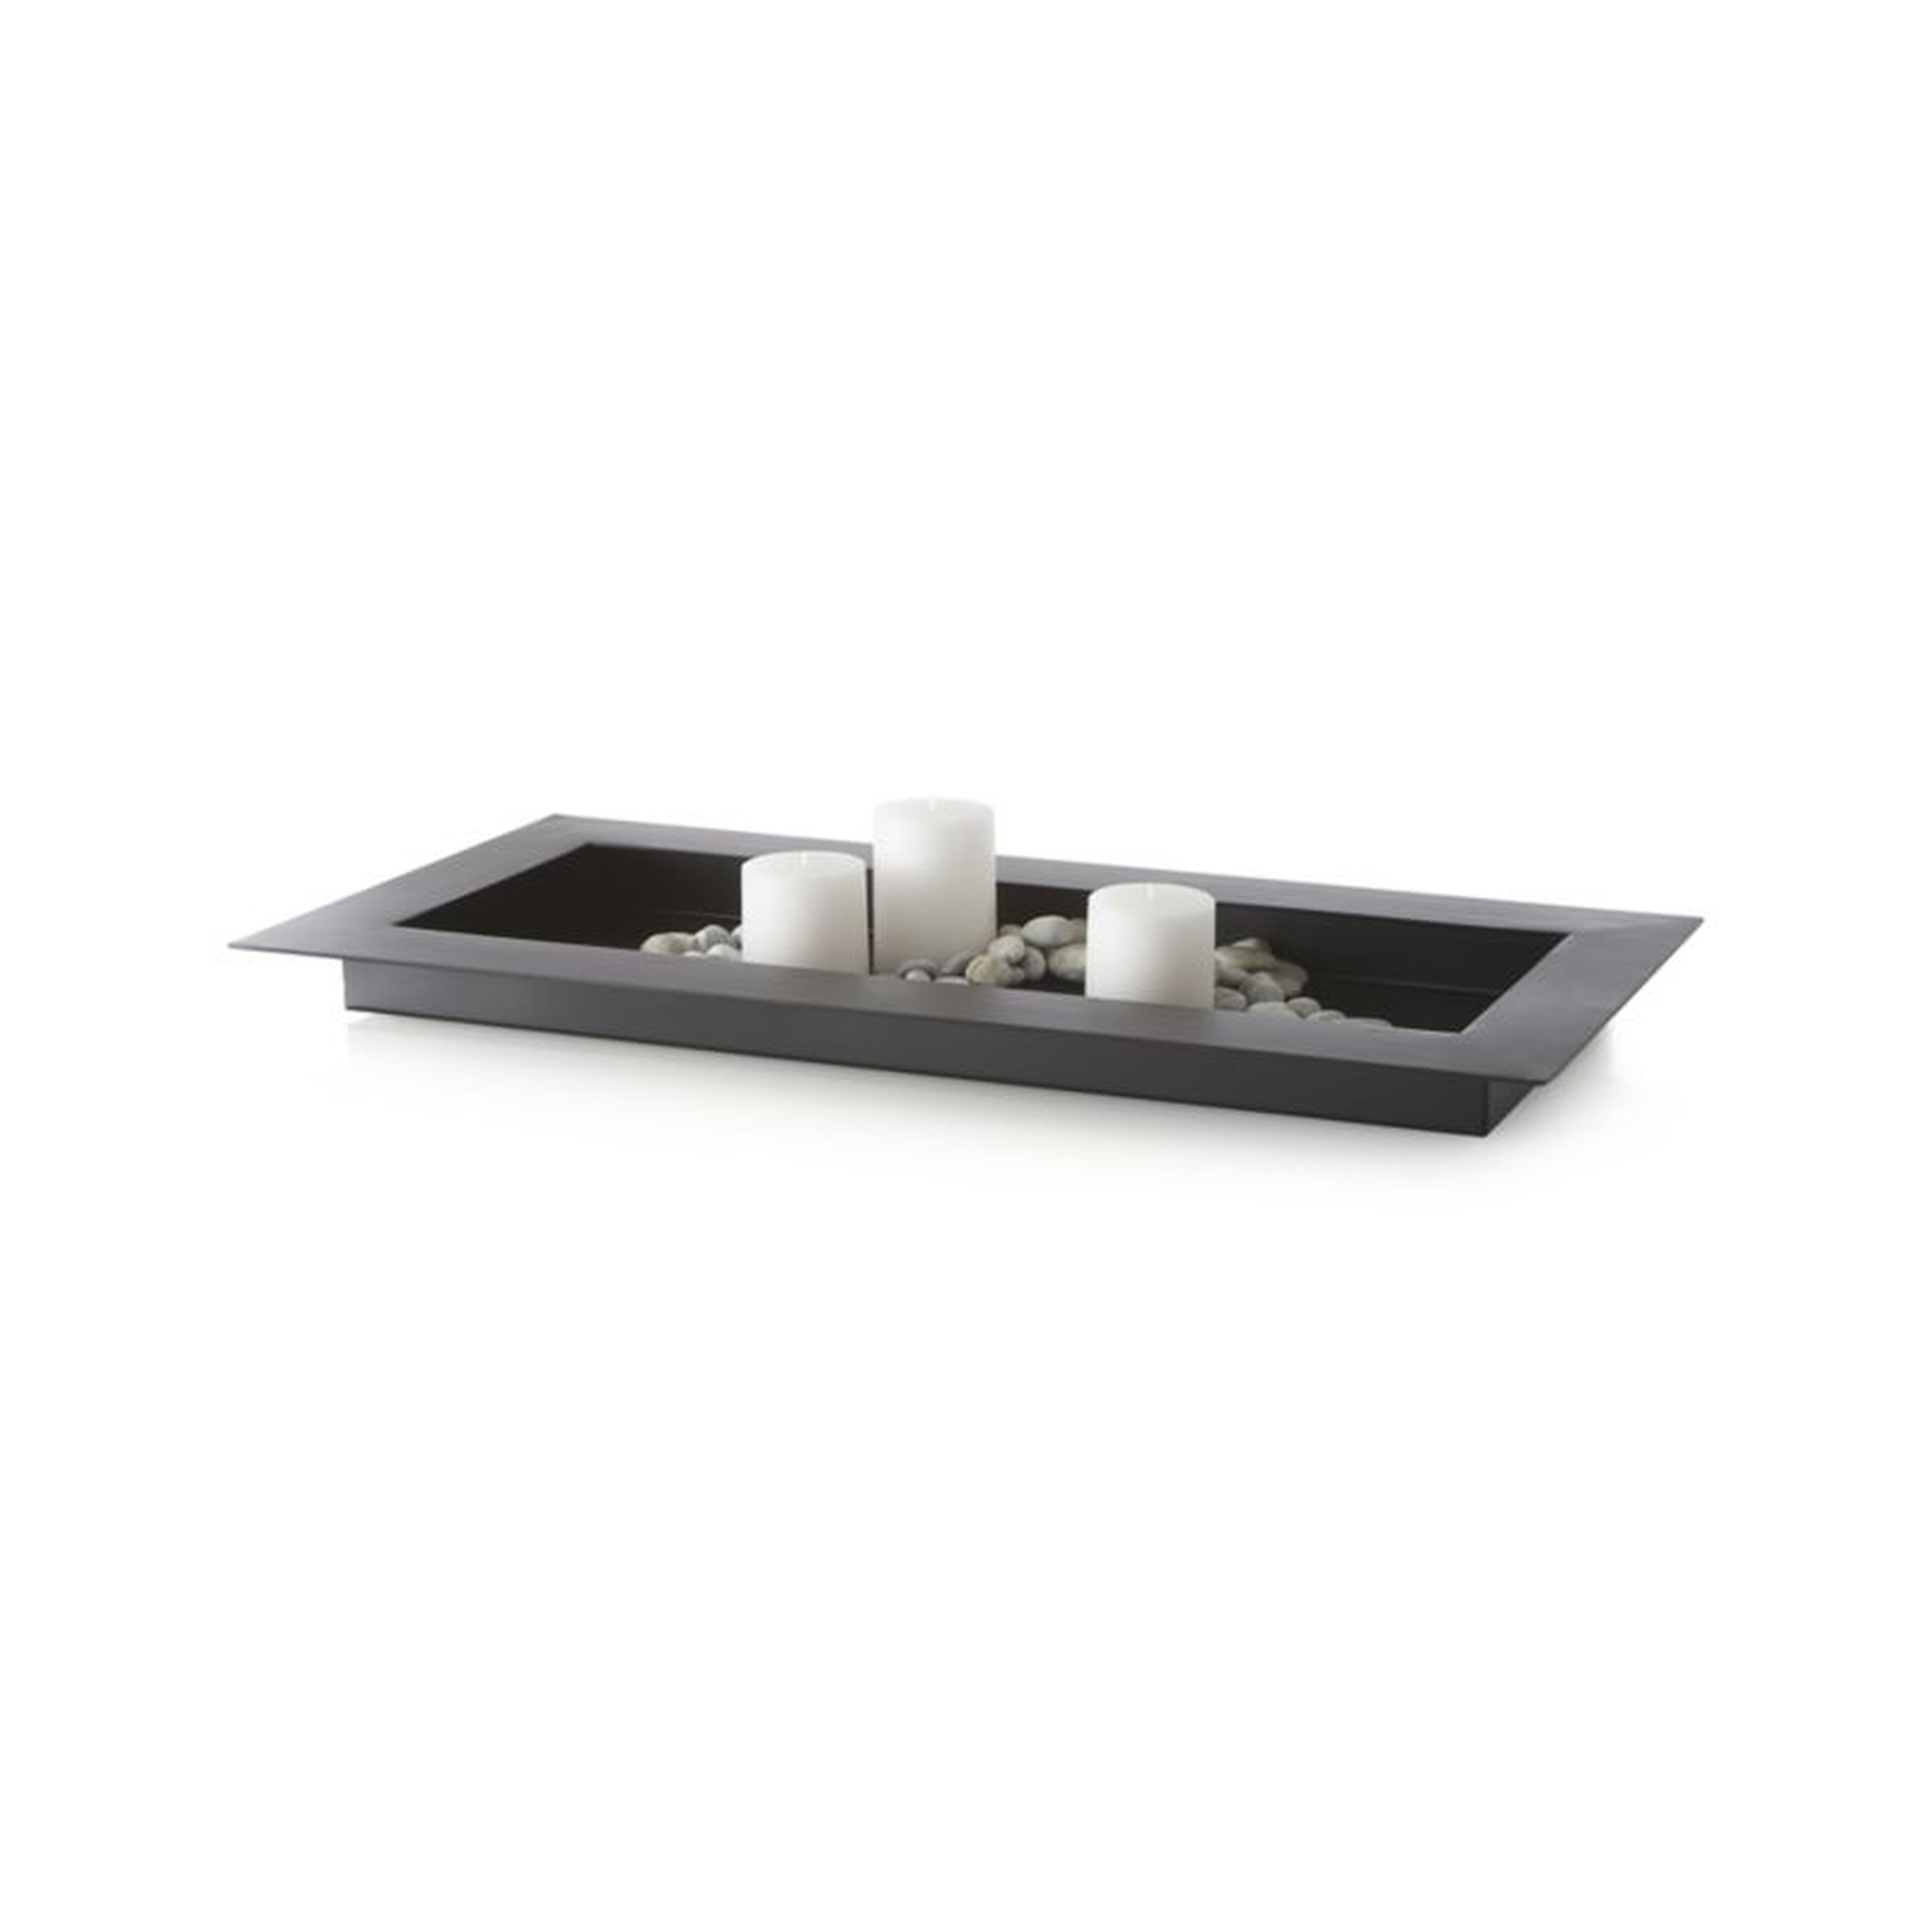 Reflection 32" Black Metal Centerpiece - Crate and Barrel